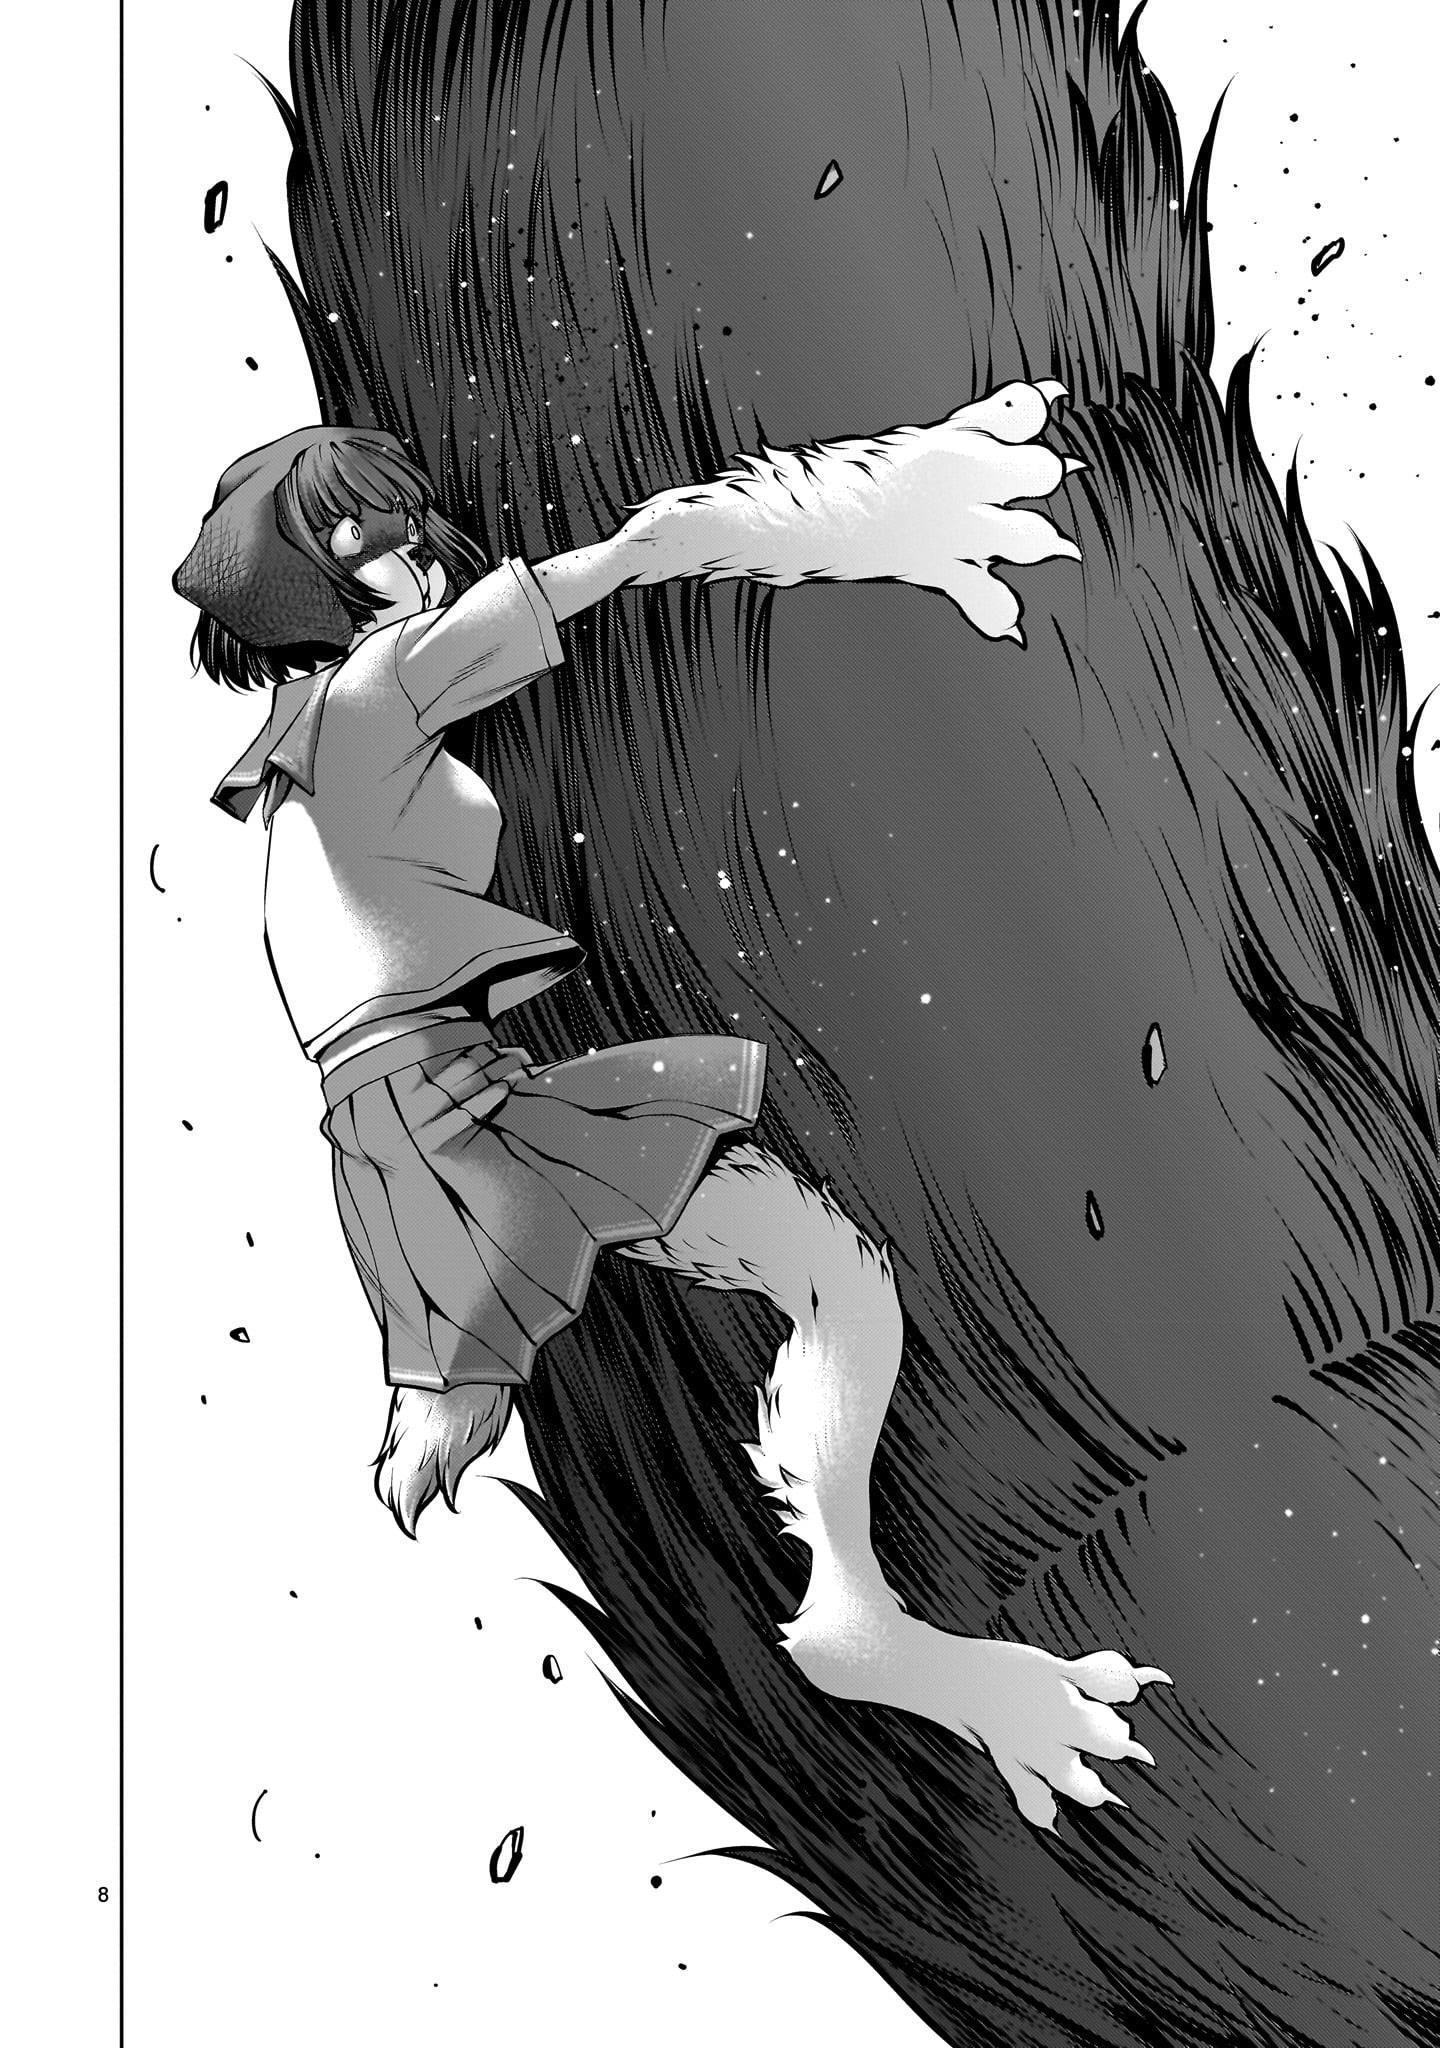 Read Killing Bites Vol.22 Chapter 111: you Really Do Seem A Lot